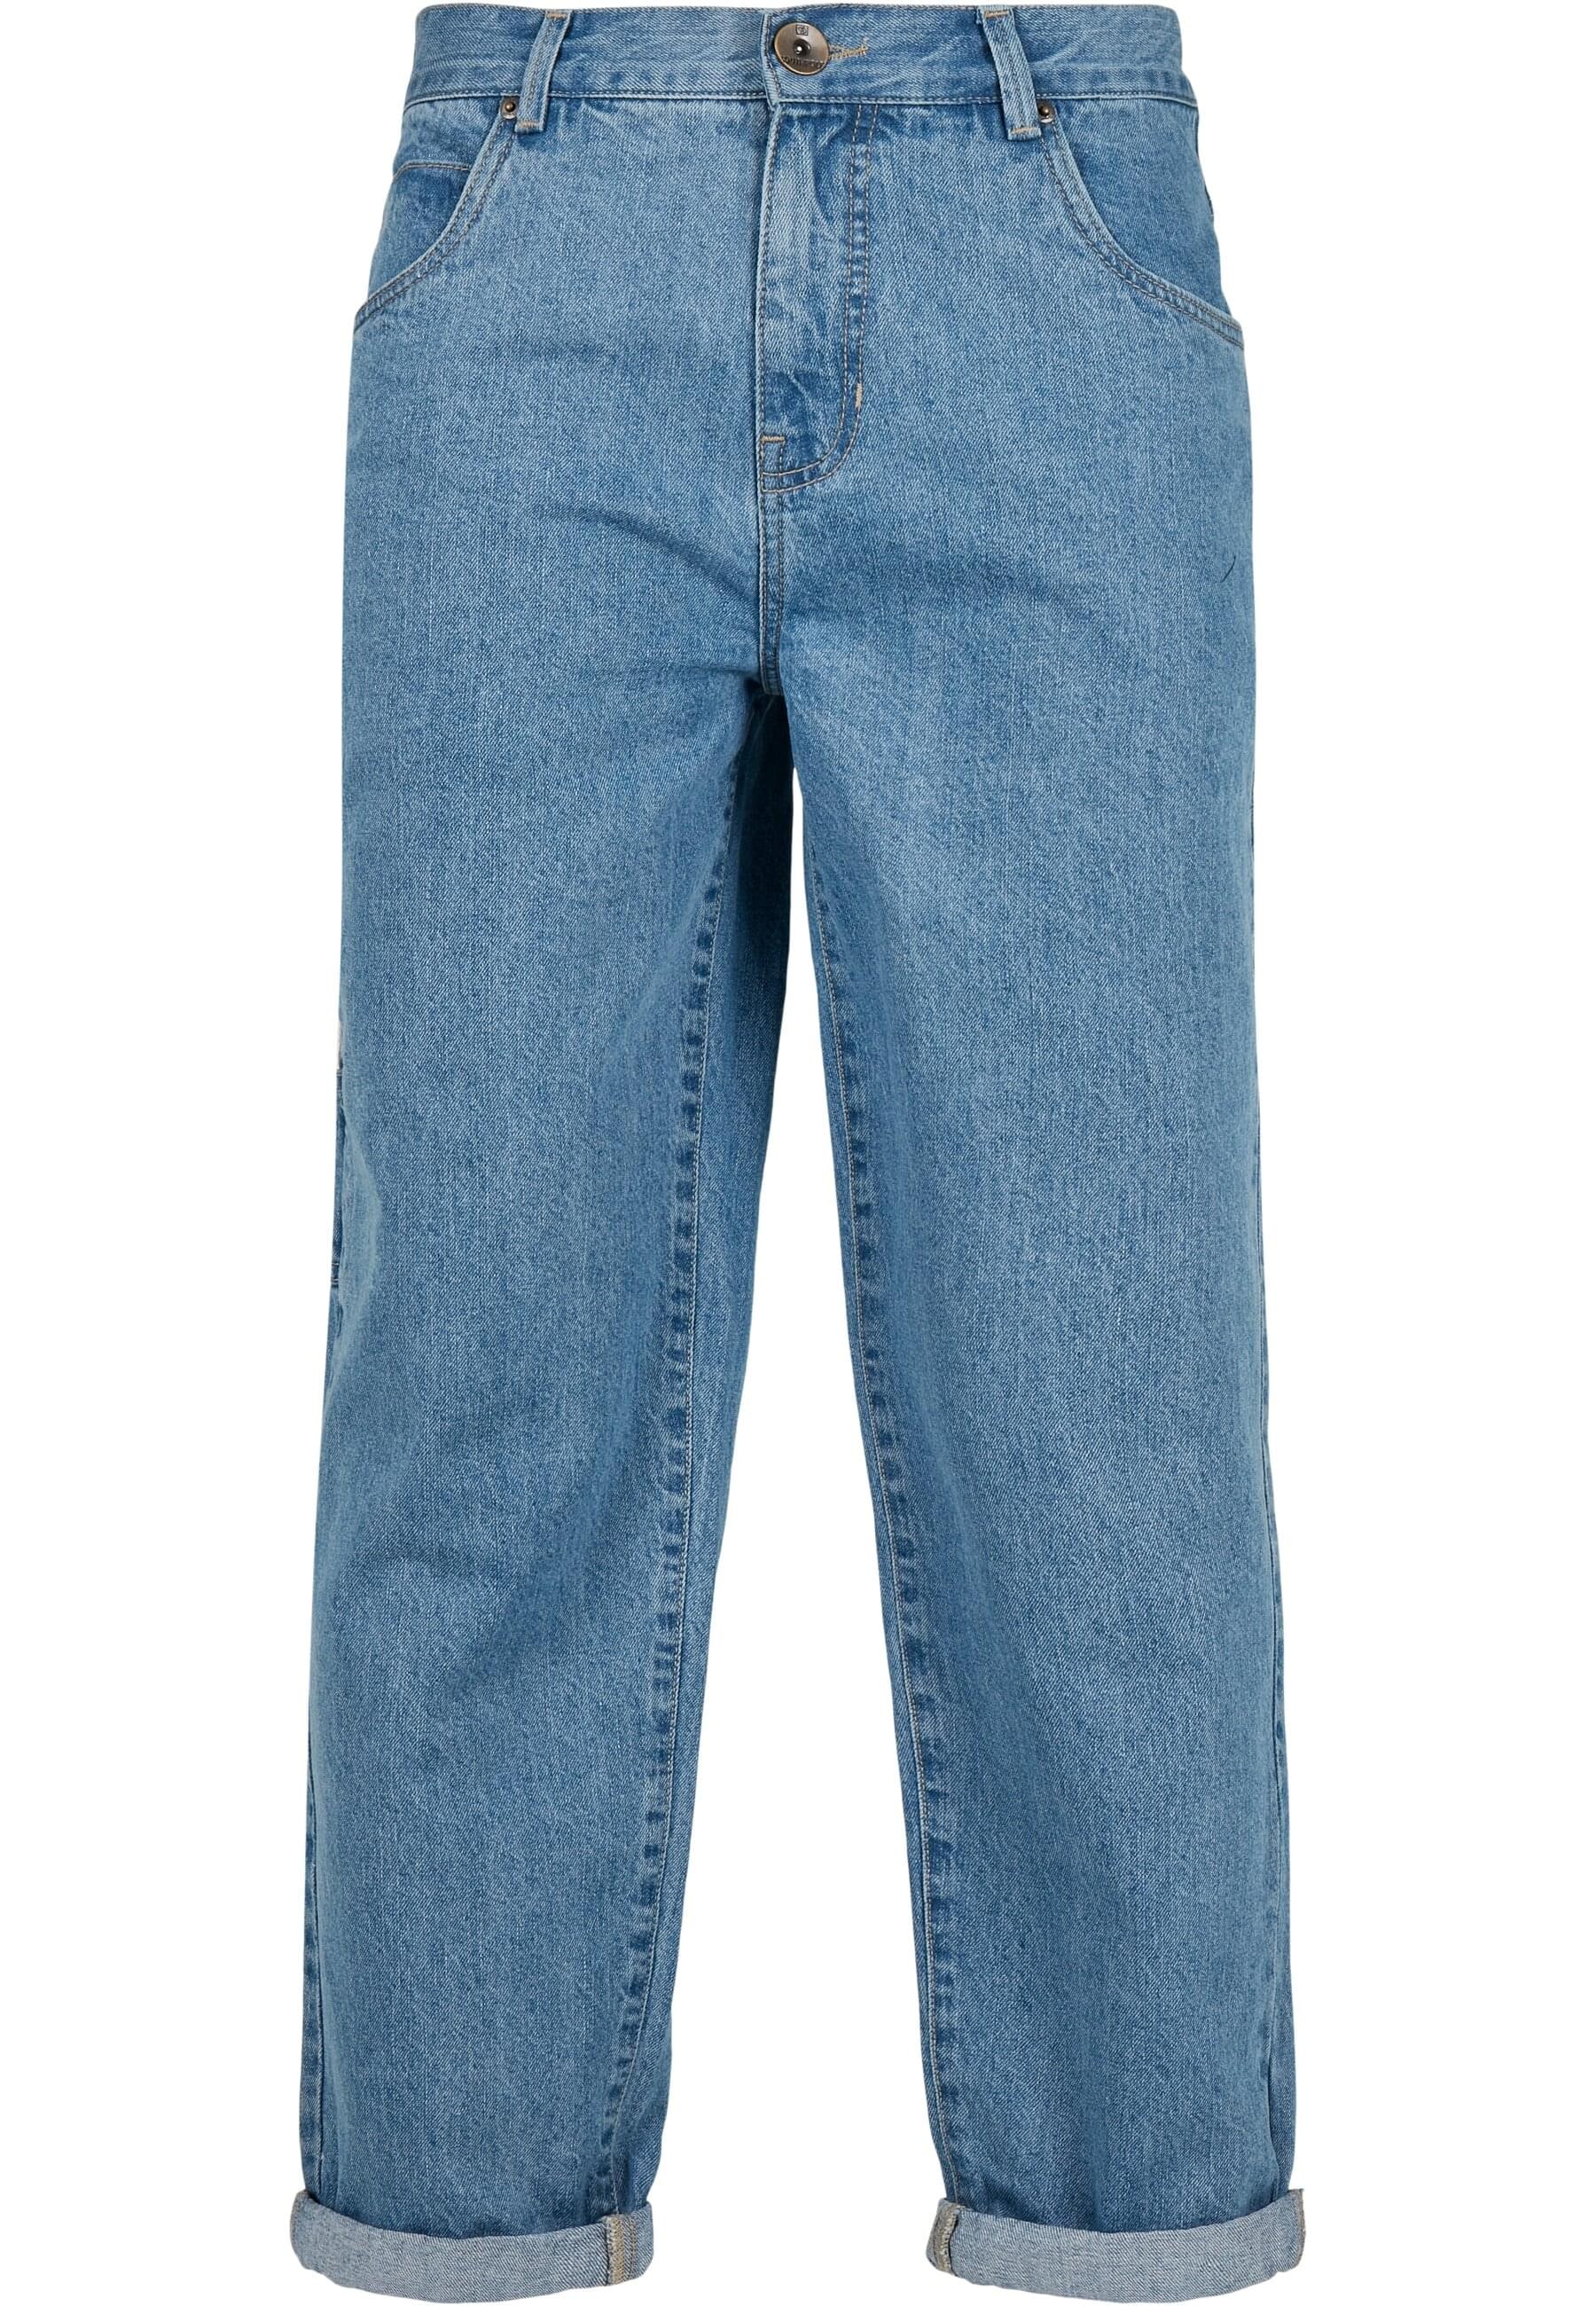 Bequeme Jeans »Southpole Herren Southpole Embroidery Denim«, (1 tlg.)